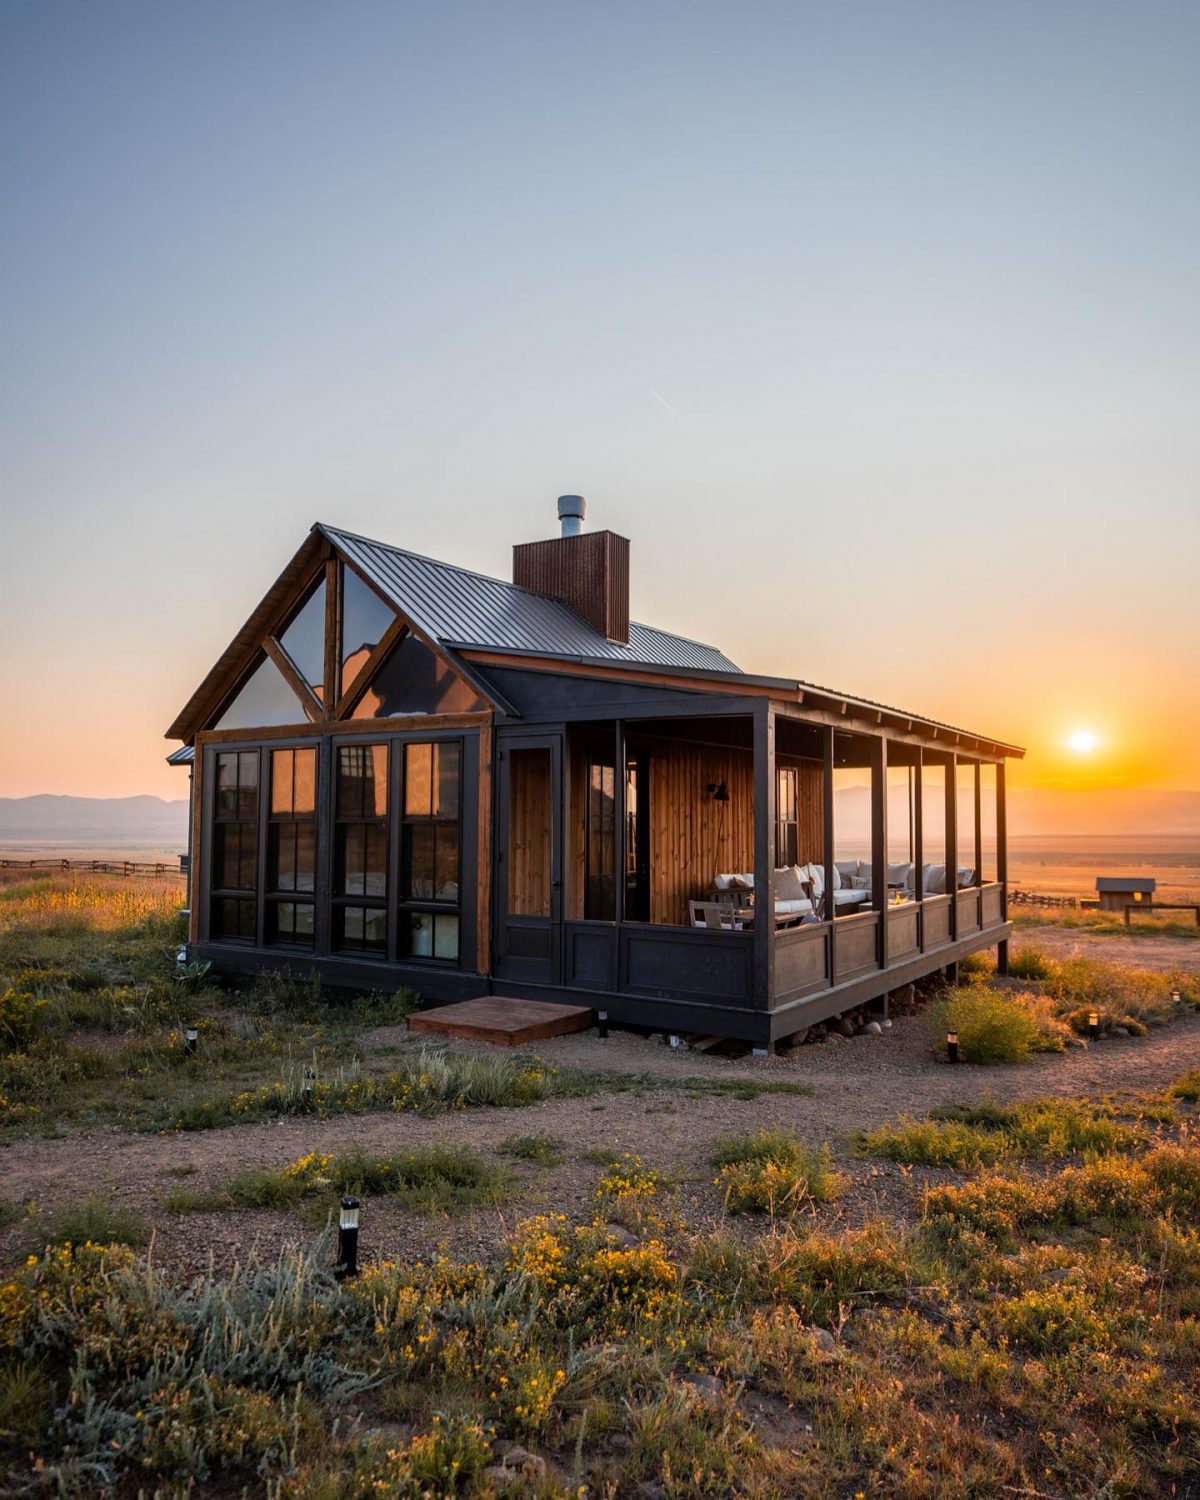 The Three Peaks Ranch Cabin